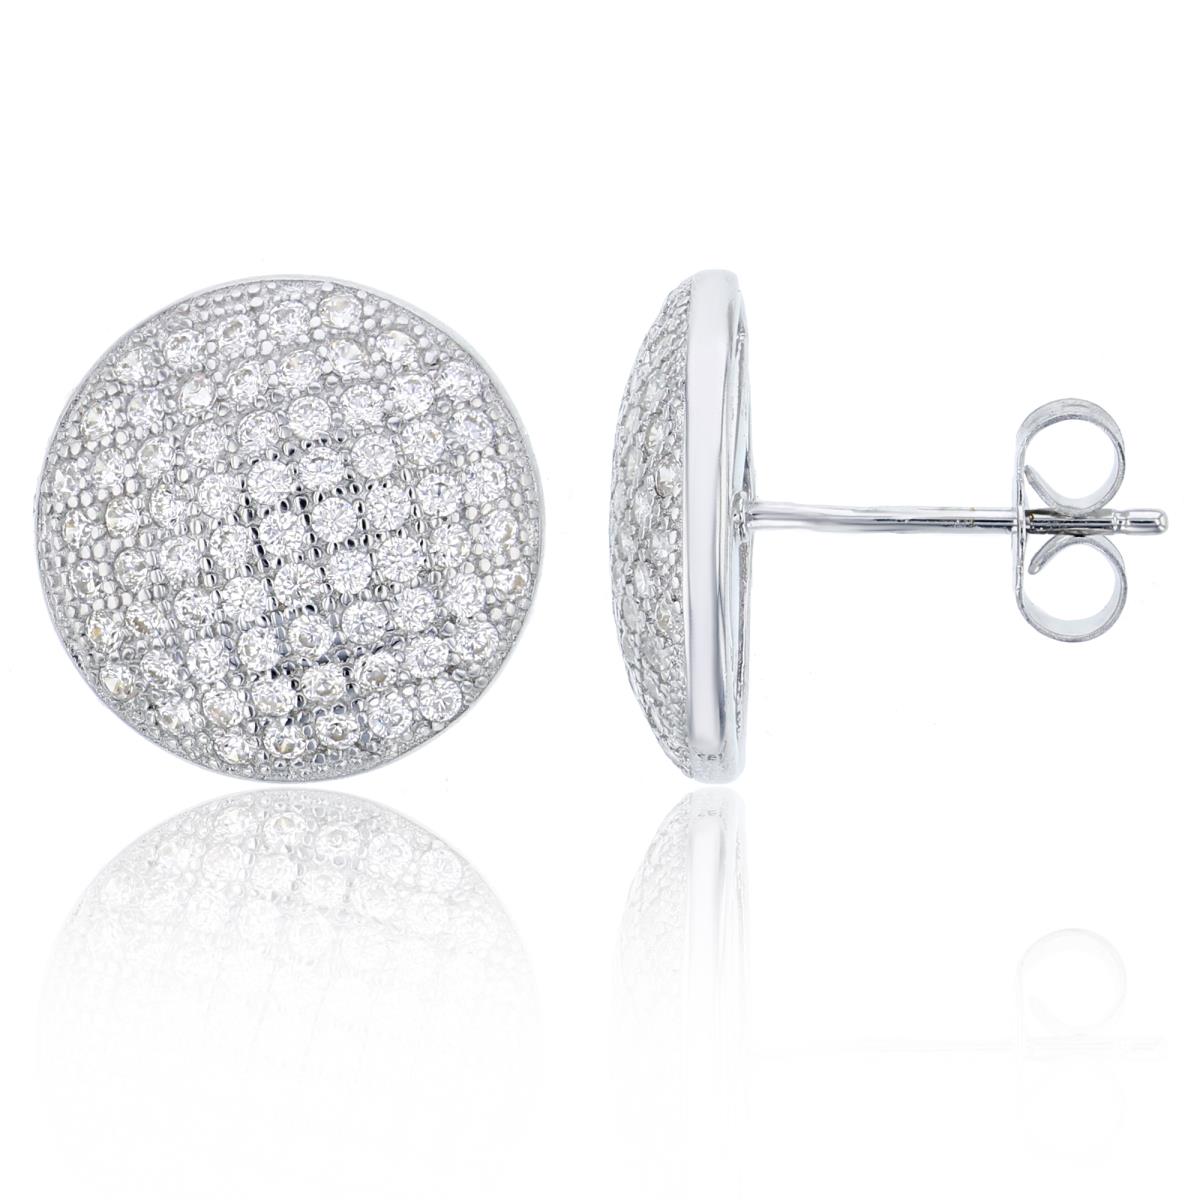 Sterling Silver 15mm Micropave Round Beveled Stud Earring